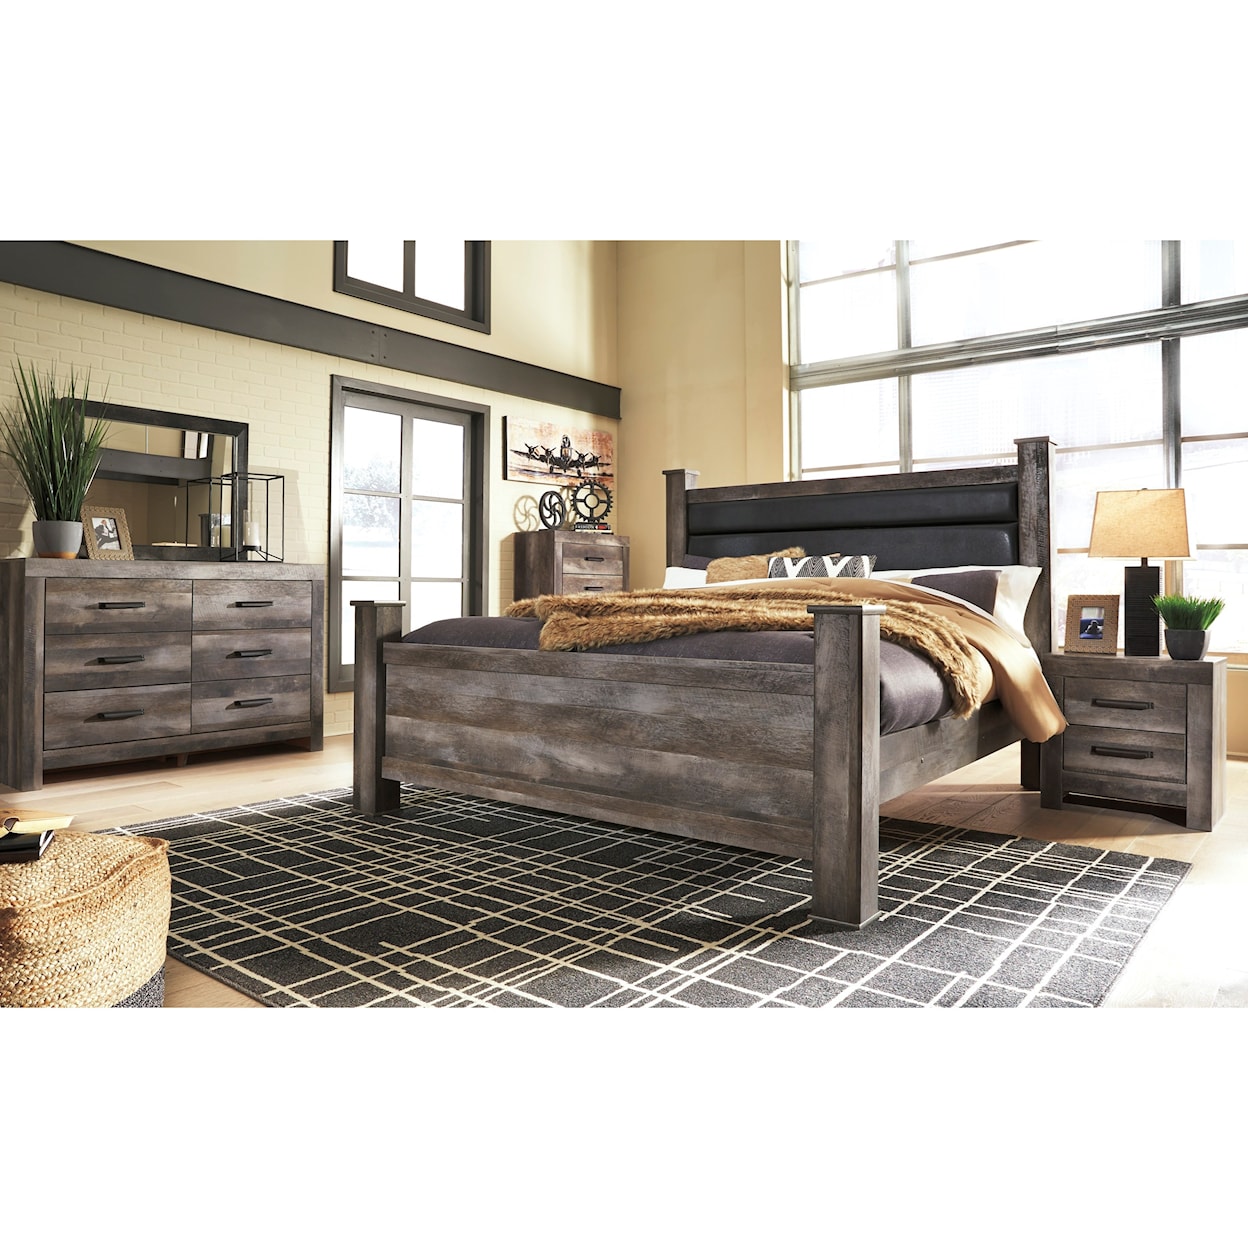 Signature Wilde King Poster Bed